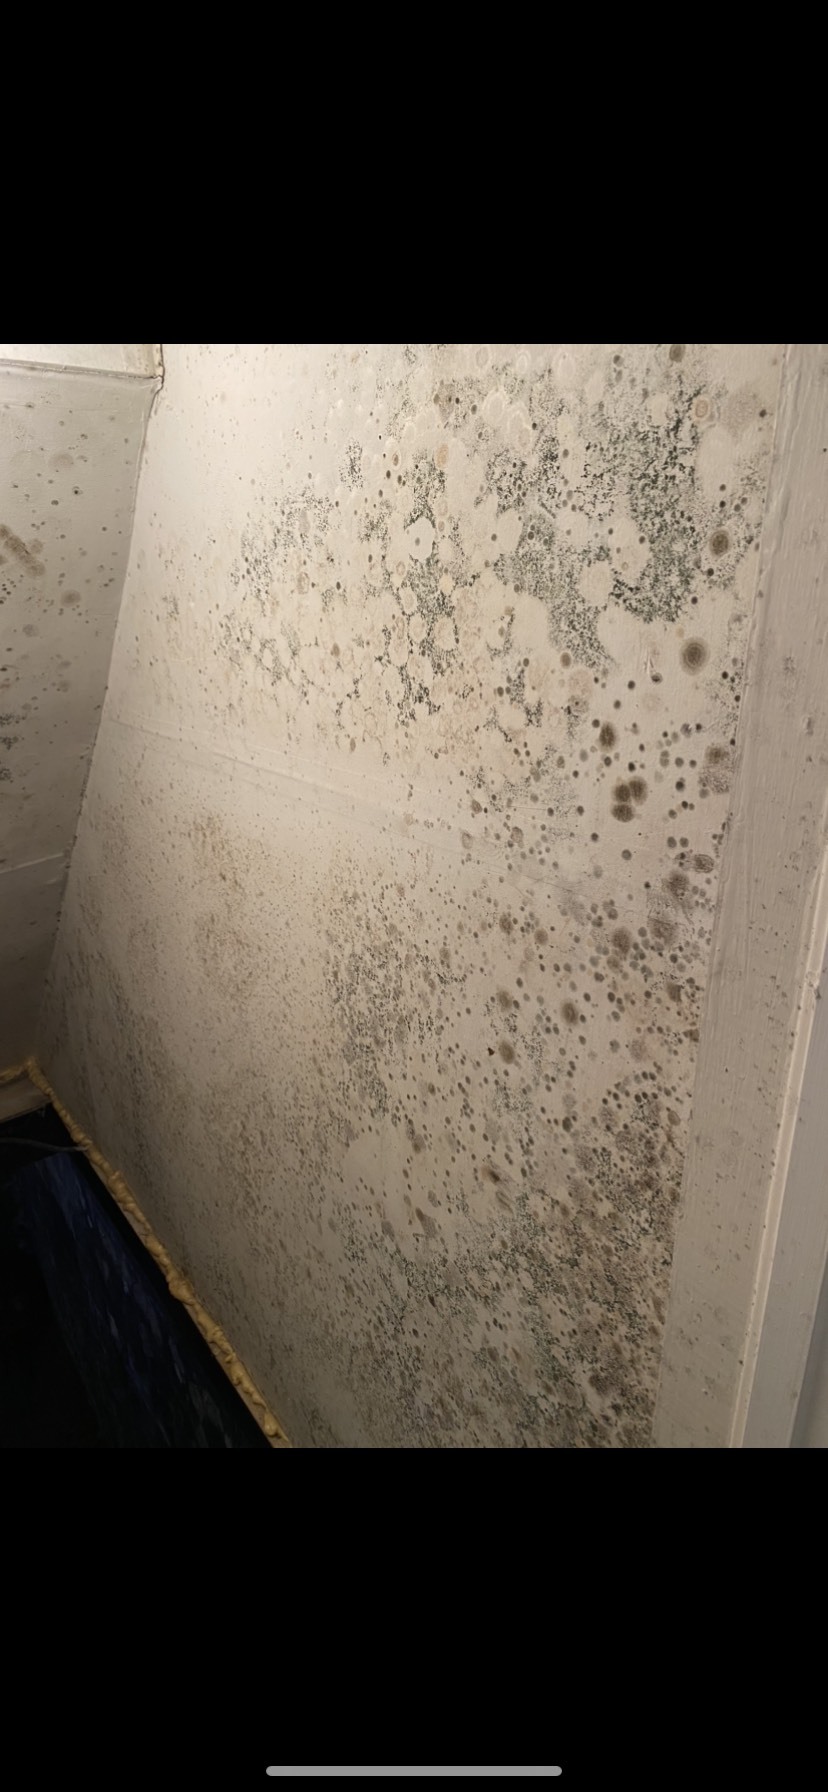 Mold that covers more than a small area typically needs to be dealt with by a professional.